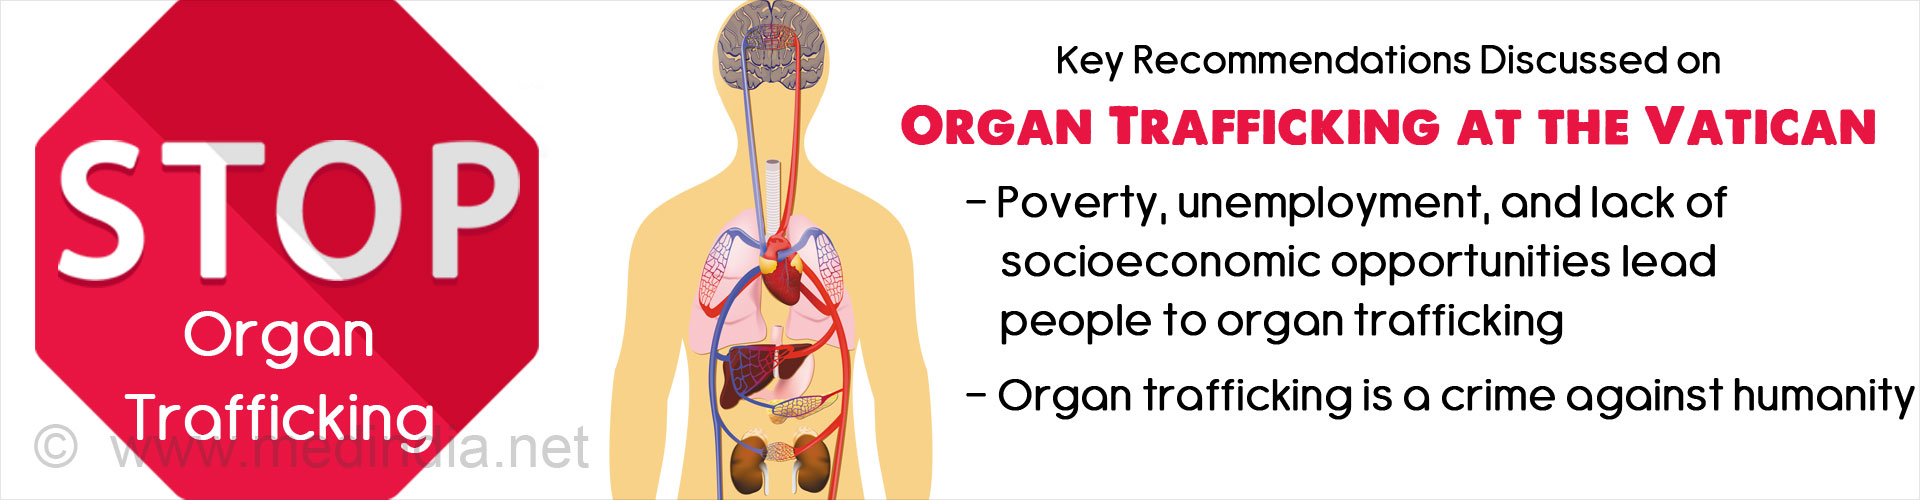 Key Recommendations Discussed on Organ Trafficking at the Vatican
- Poverty, unemployment, and lack of socioeconomic opportunities lead people to organ trafficking
- Organ trafficking is a crime against humanity
STOP Organ Trafficking